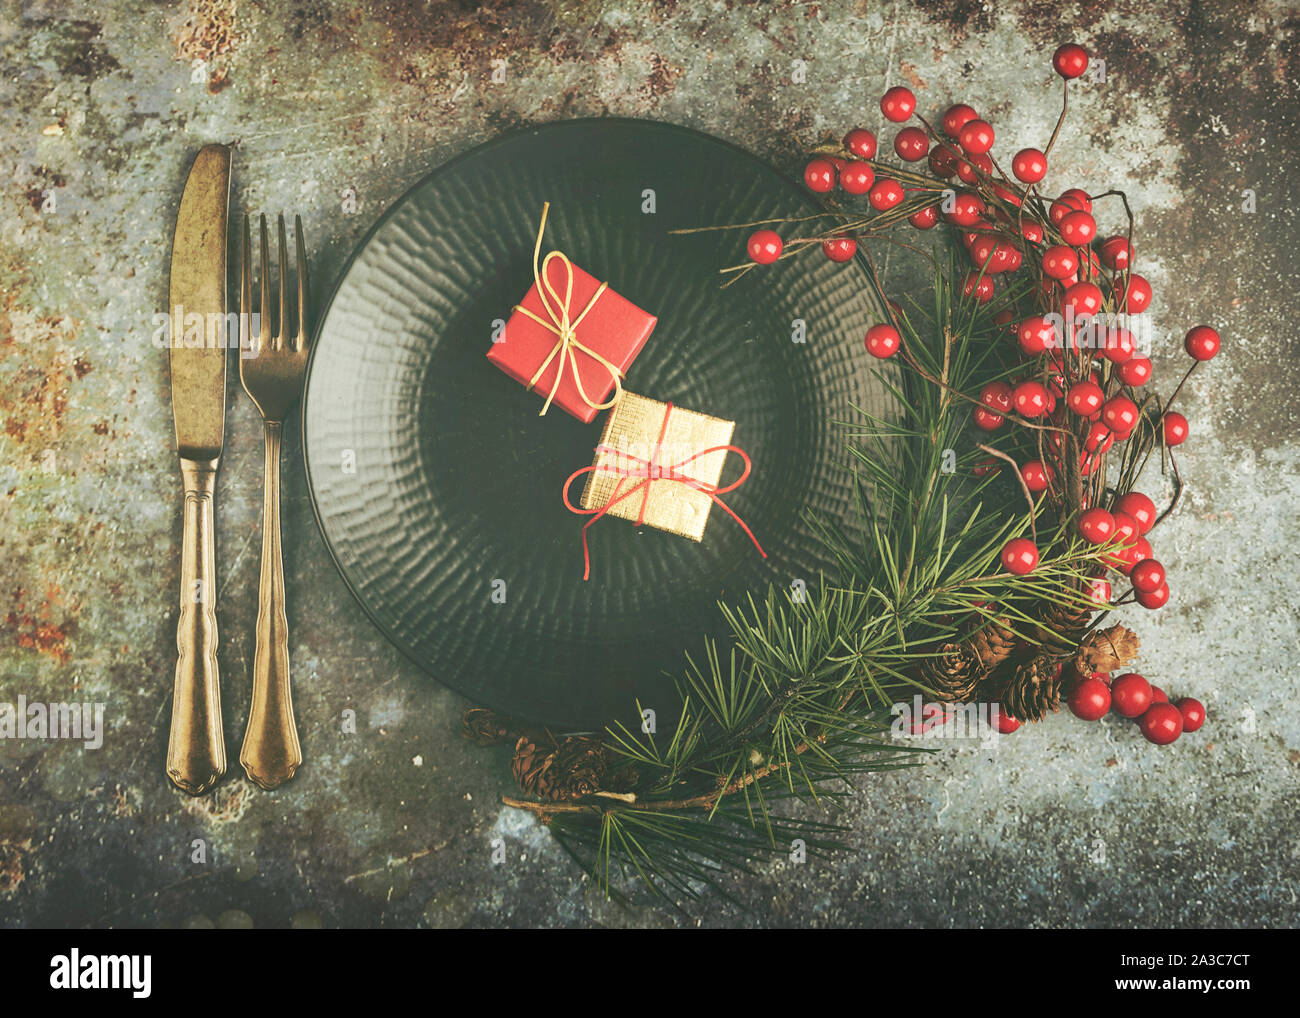 Christmas presents served on plate for Christmas Dinner with wreath on Grunge background Stock Photo